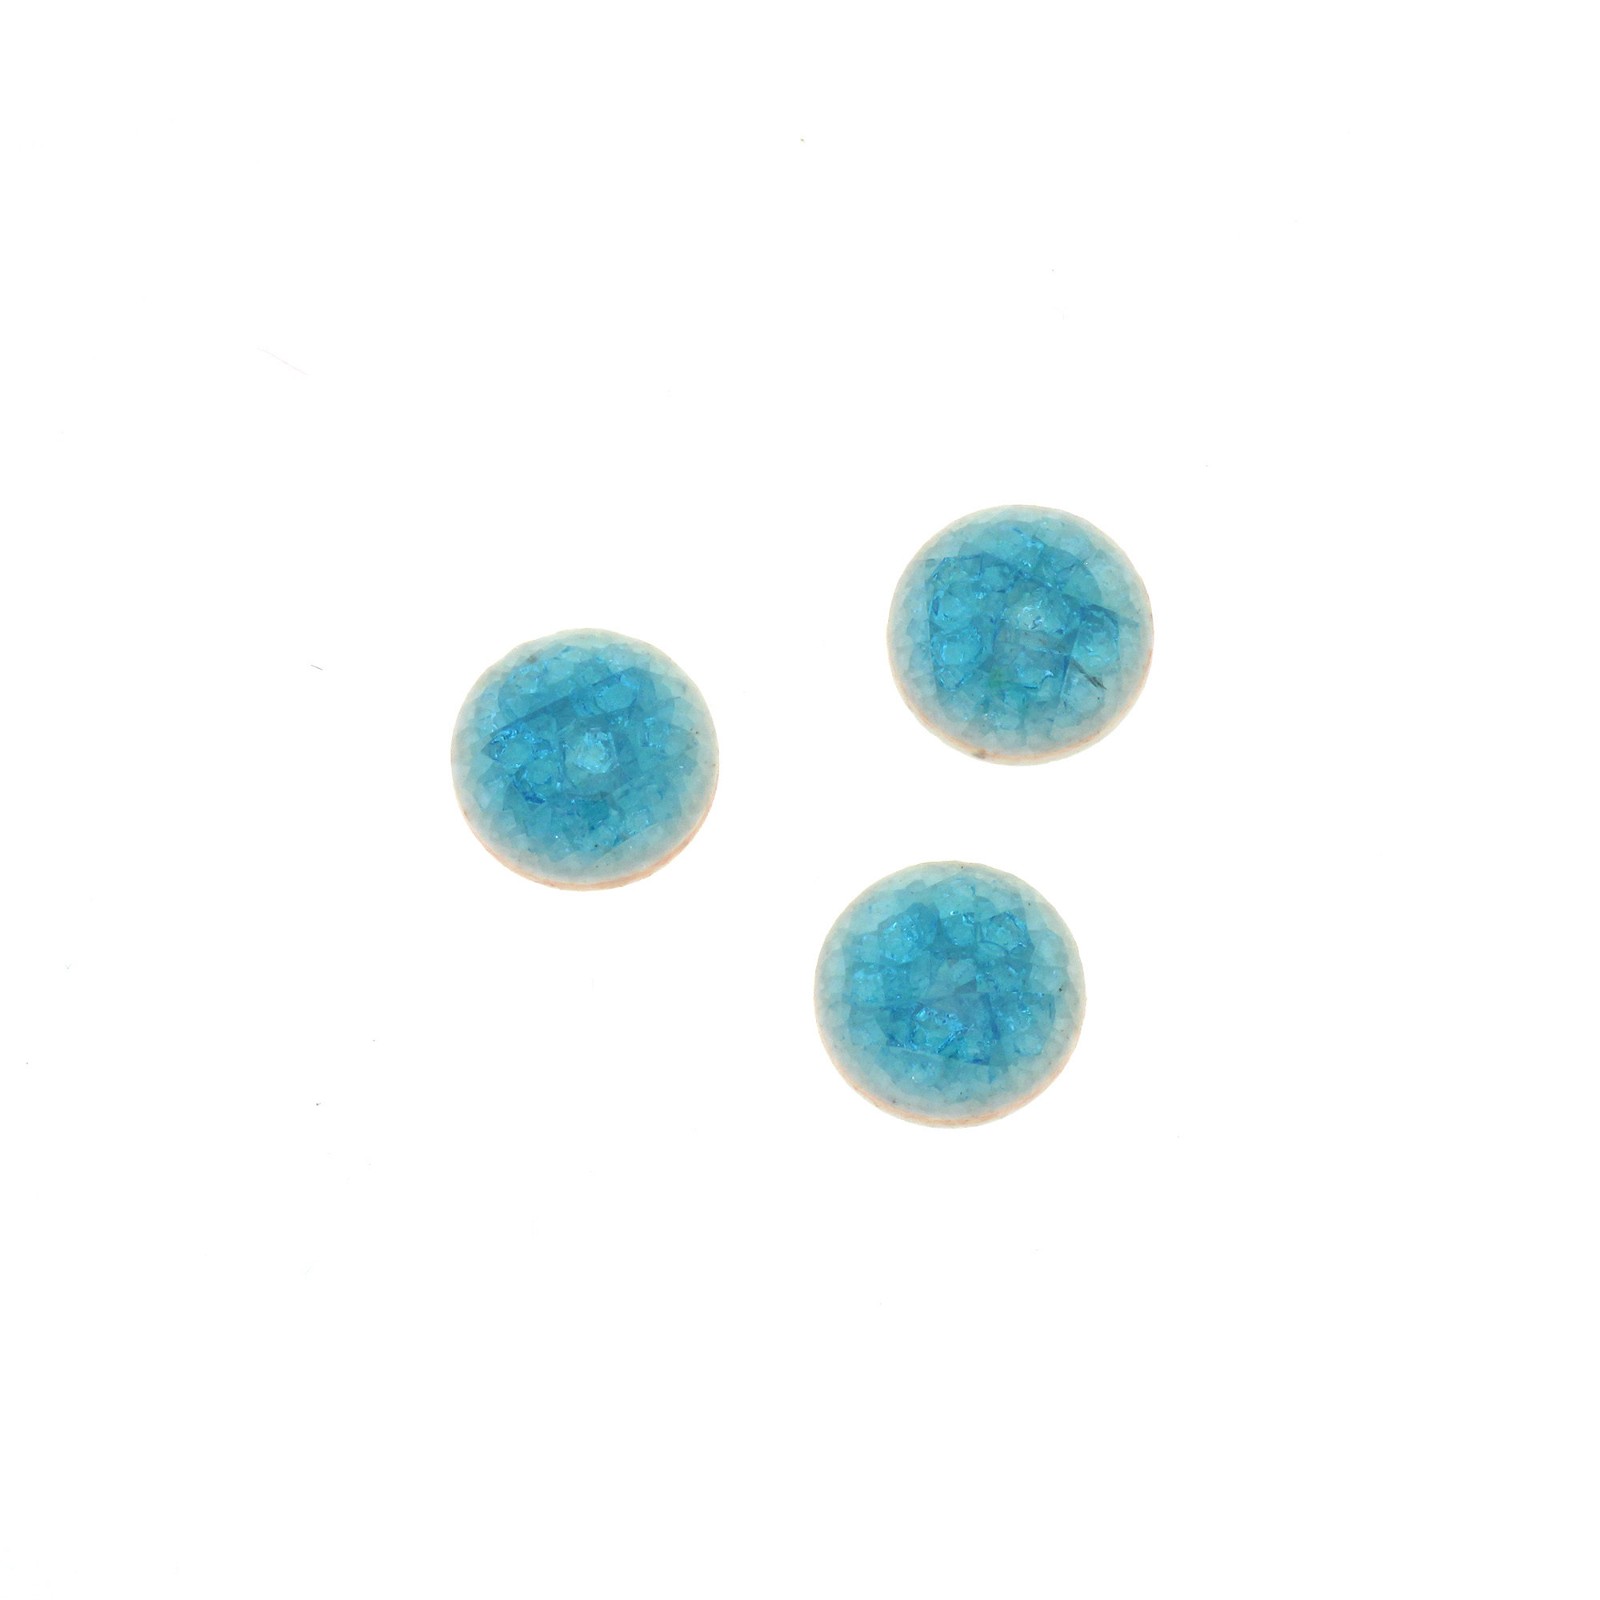 Round turquoise ceramic cabochons 12mm 1pc KBCZ1206